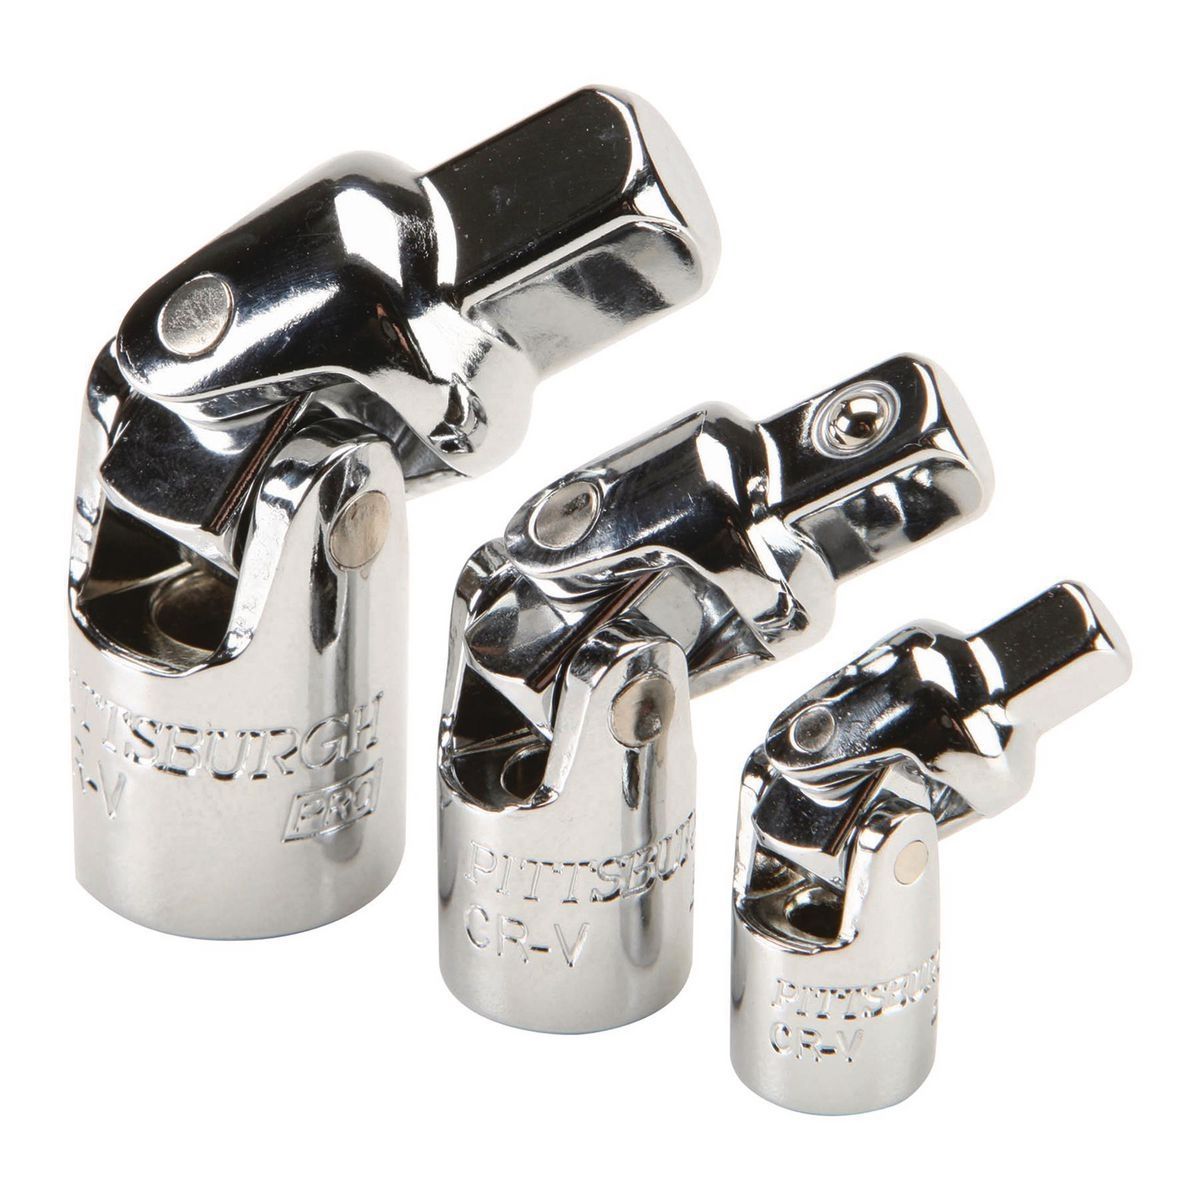 HFT PITTSBURGH Universal Joint Socket Adapter Set, 3-Piece  ($5.99 @ HFT In-Store)